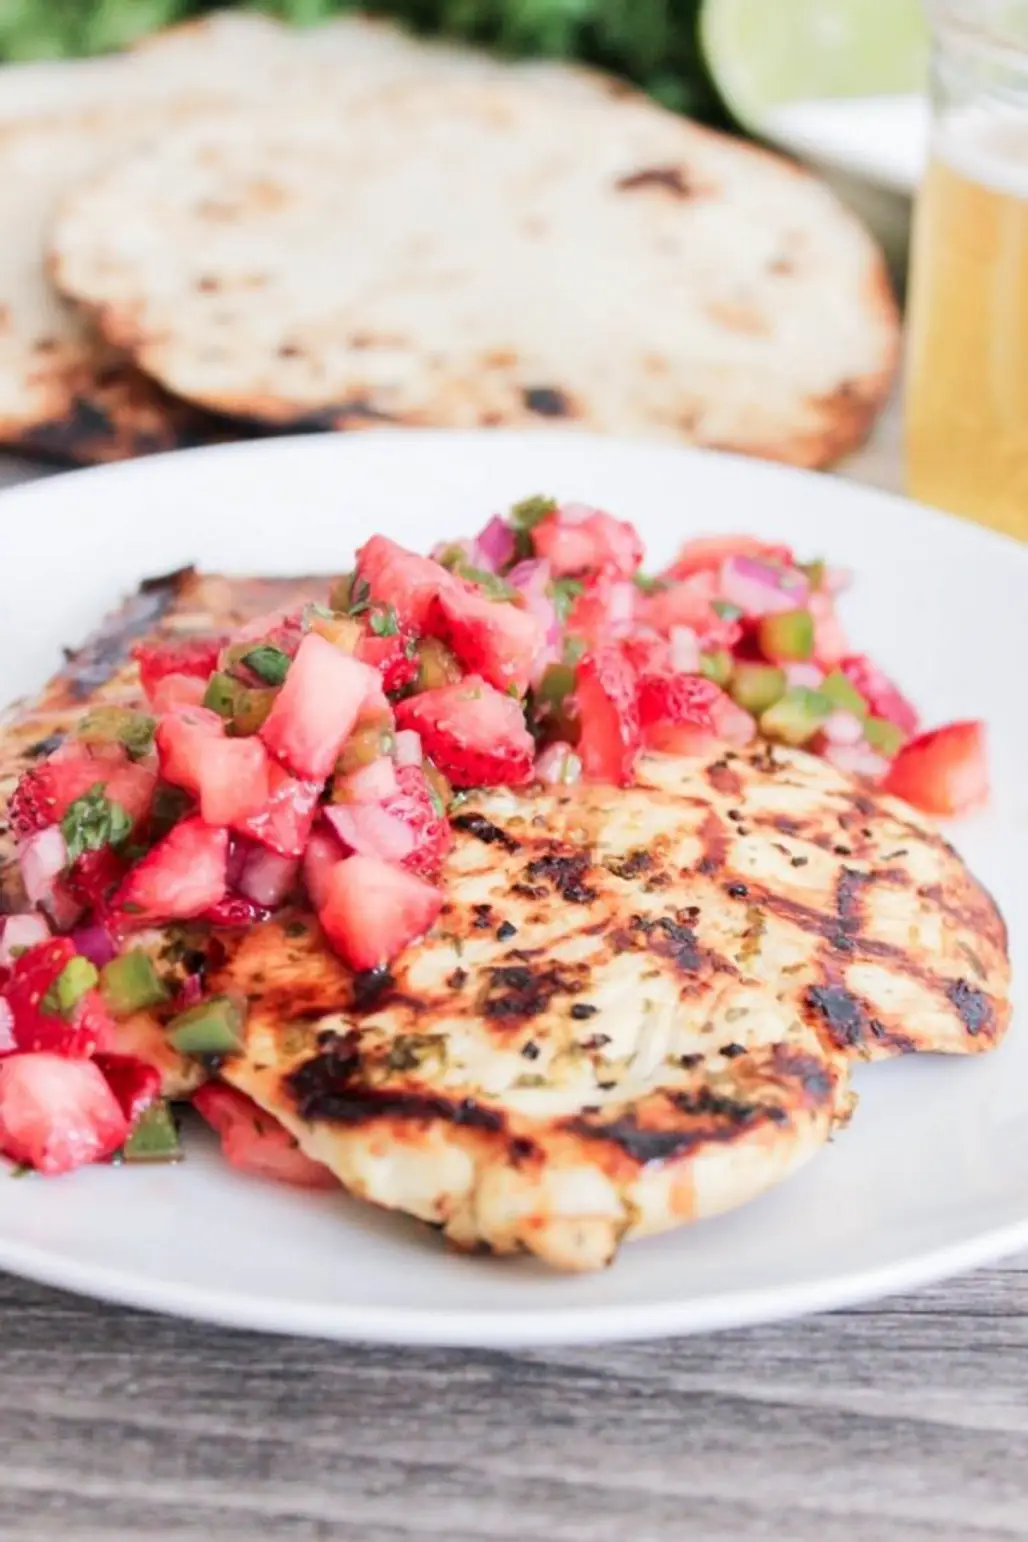 Cilantro-Lime Grilled Chicken with Strawberry-Jalapeño Salsa